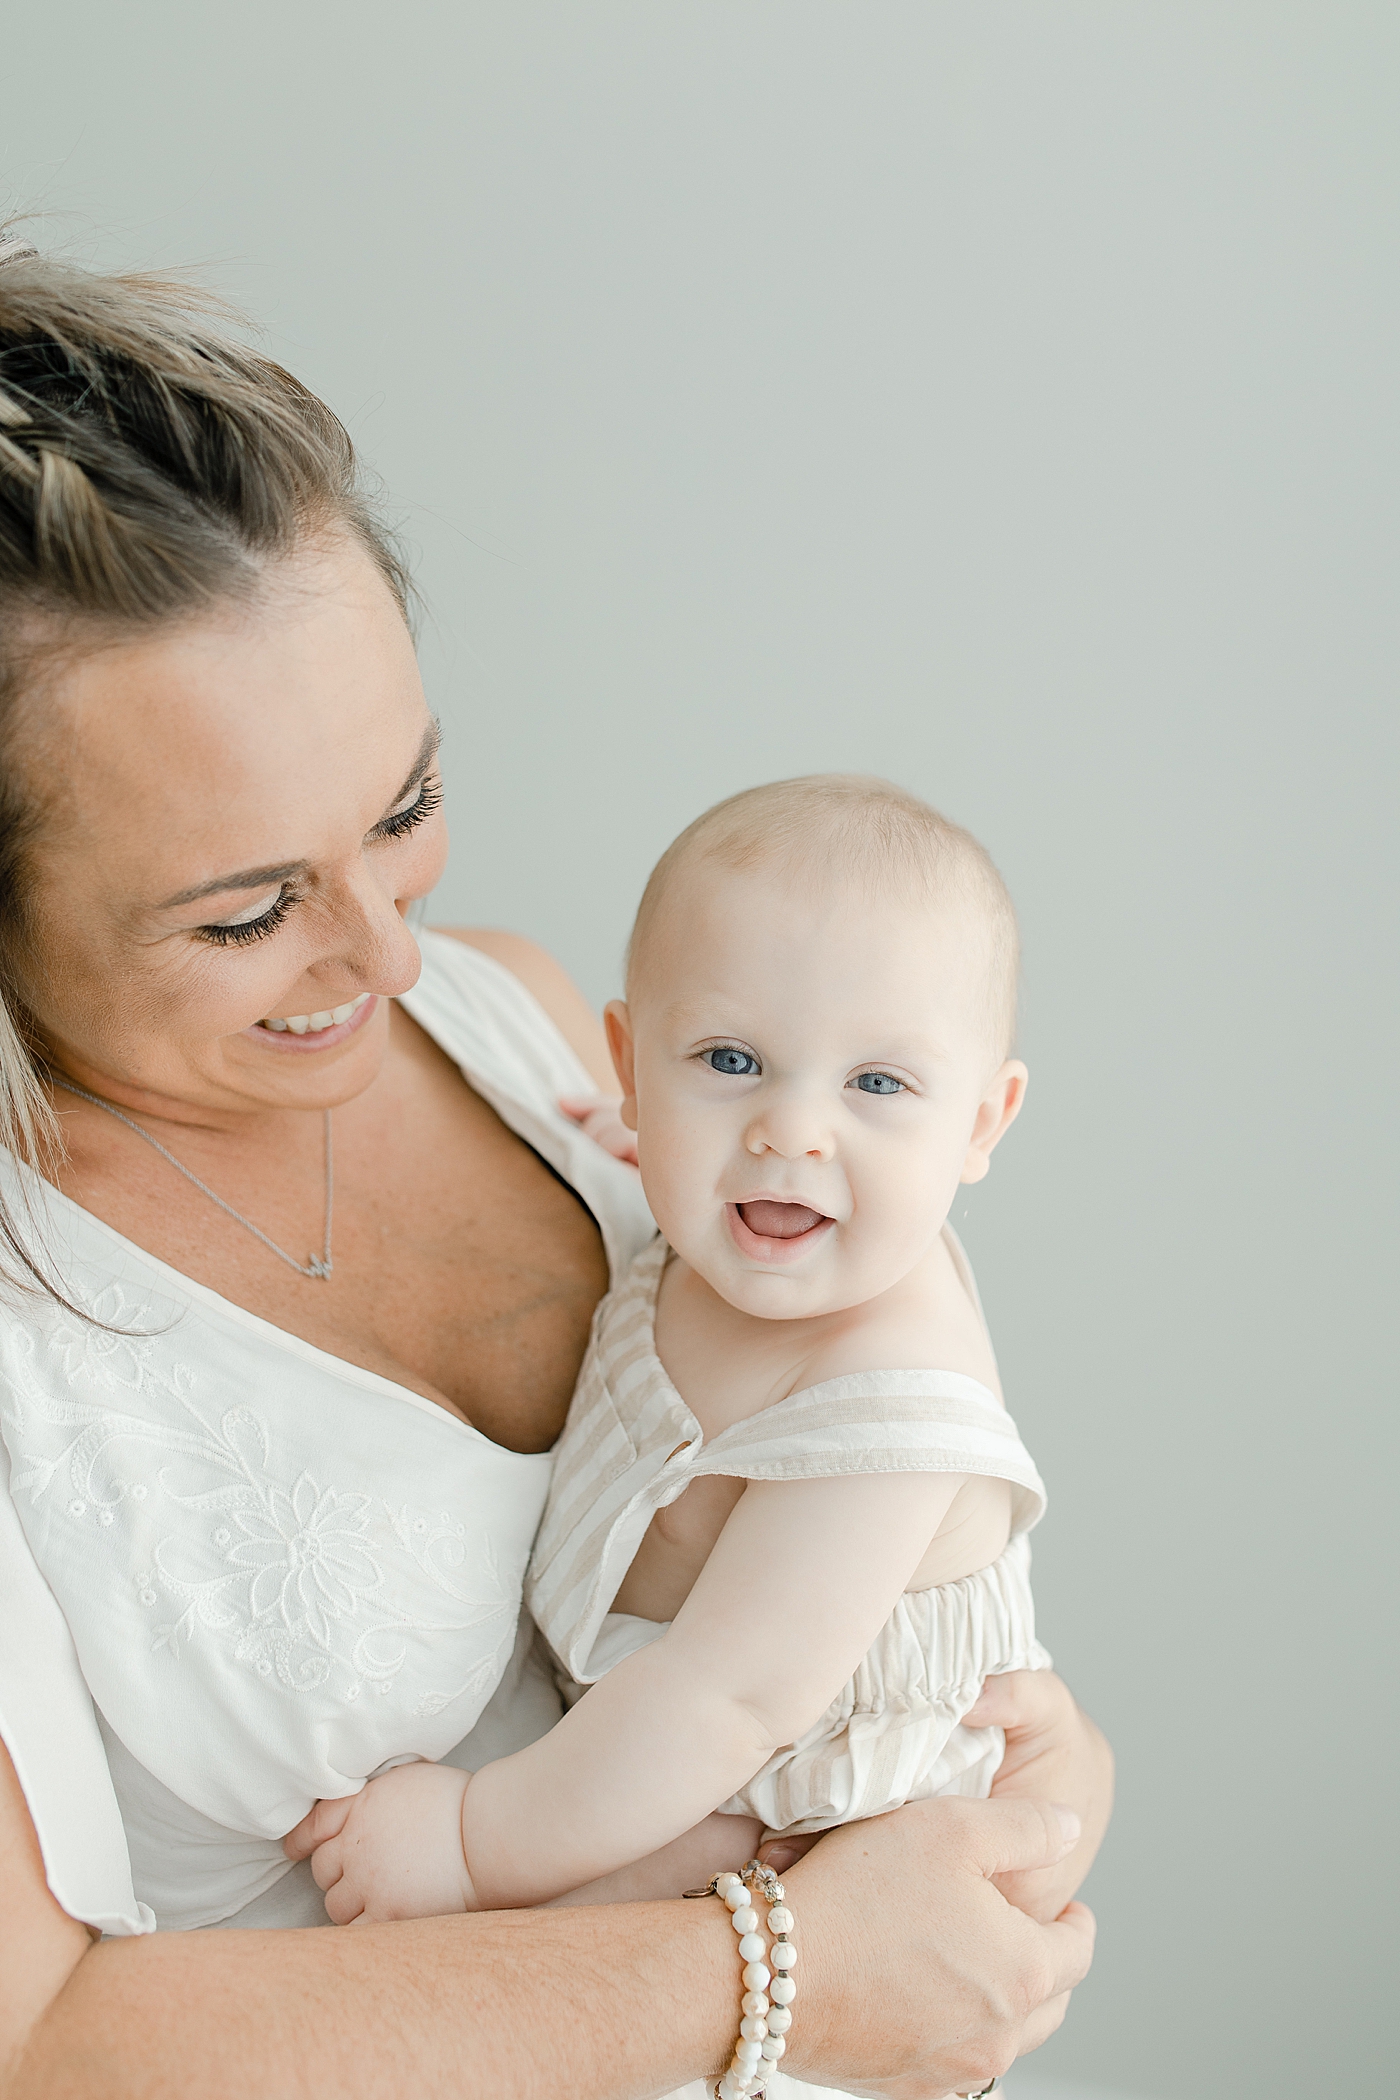 Baby boy and mom smiling | Photo by Little Sunshine Photography